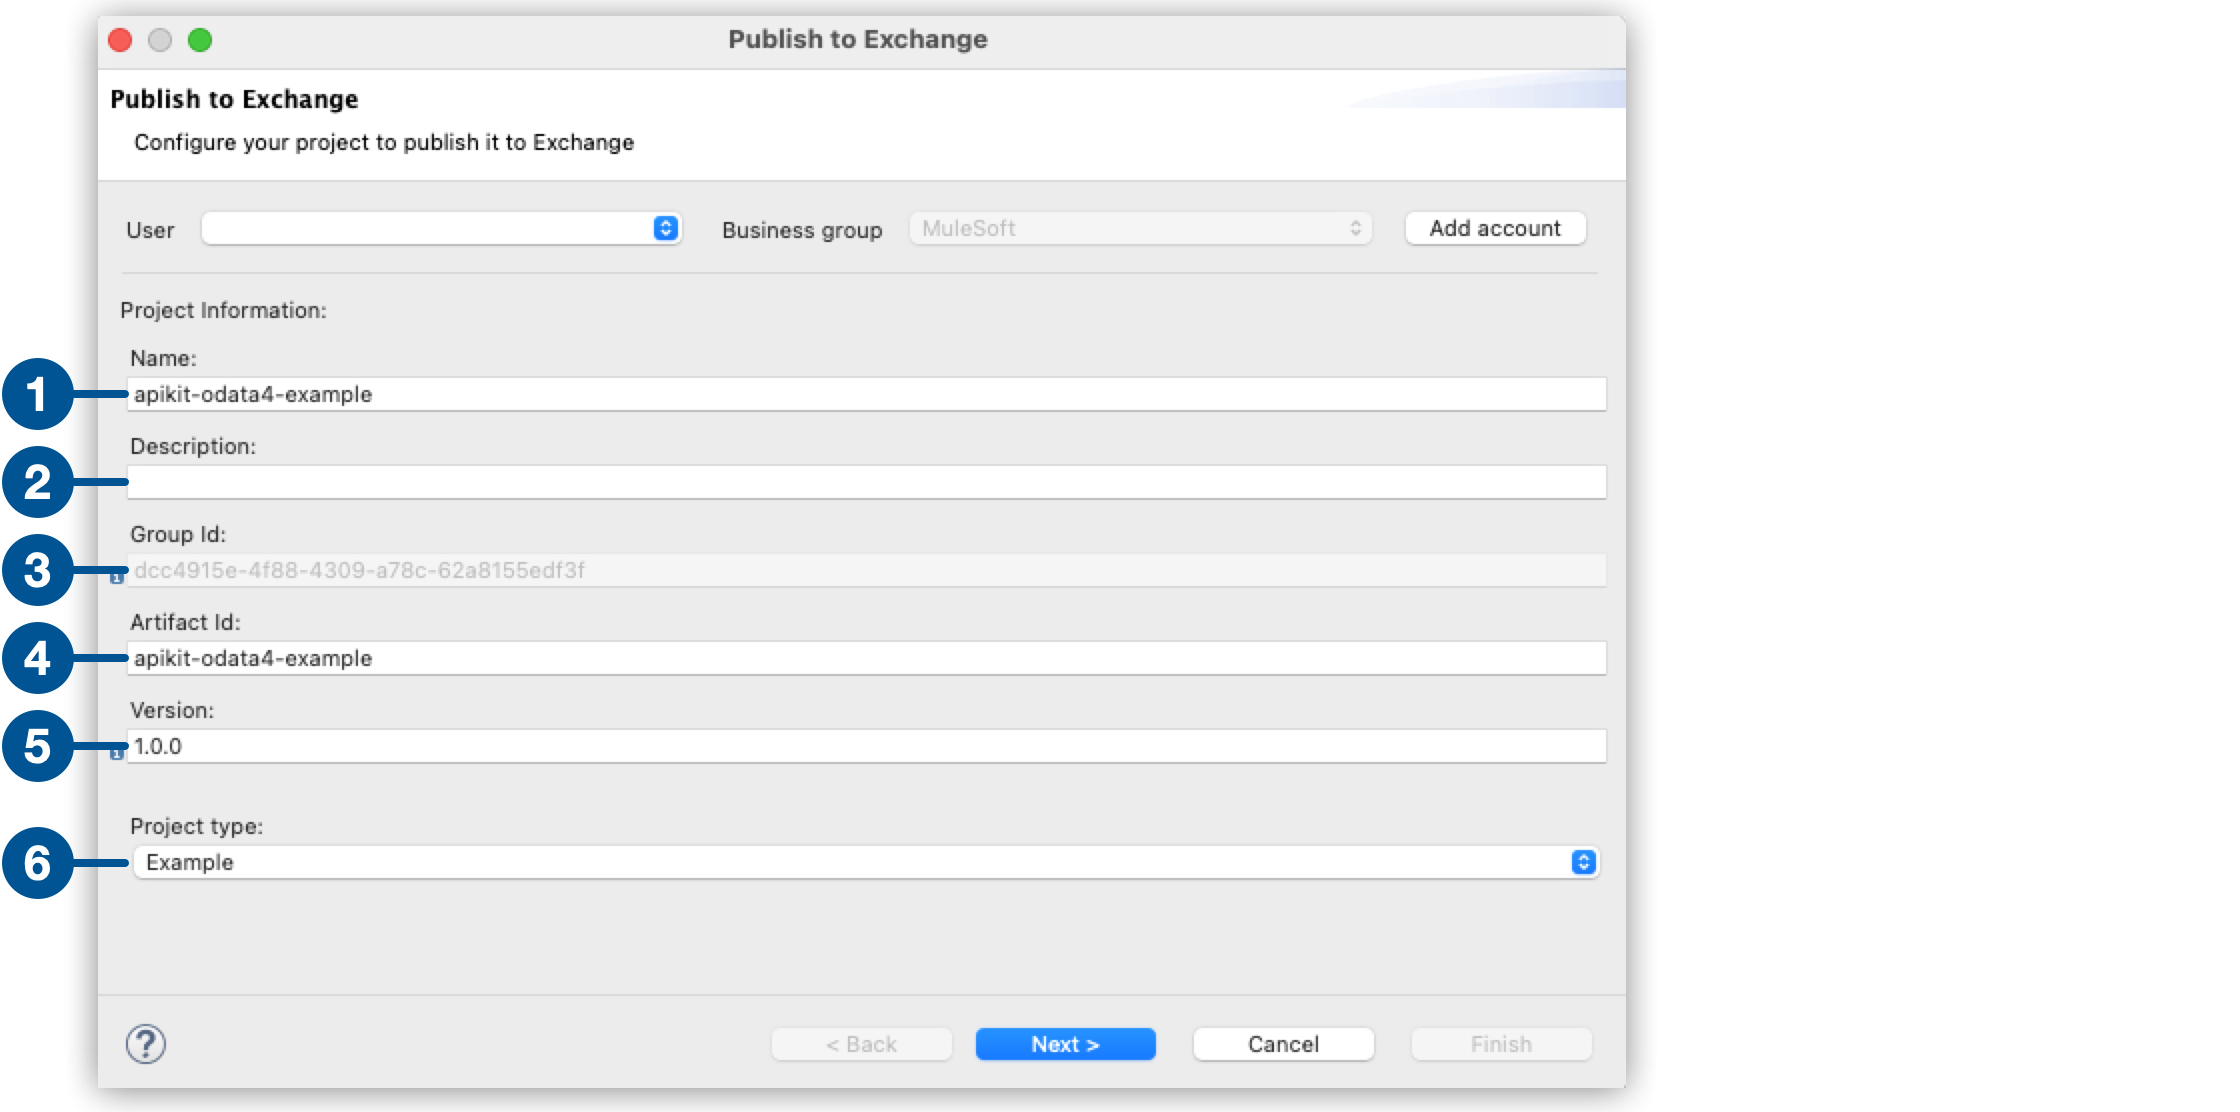 AltText:"List of fields to configure before publishing an asset to Exchange."